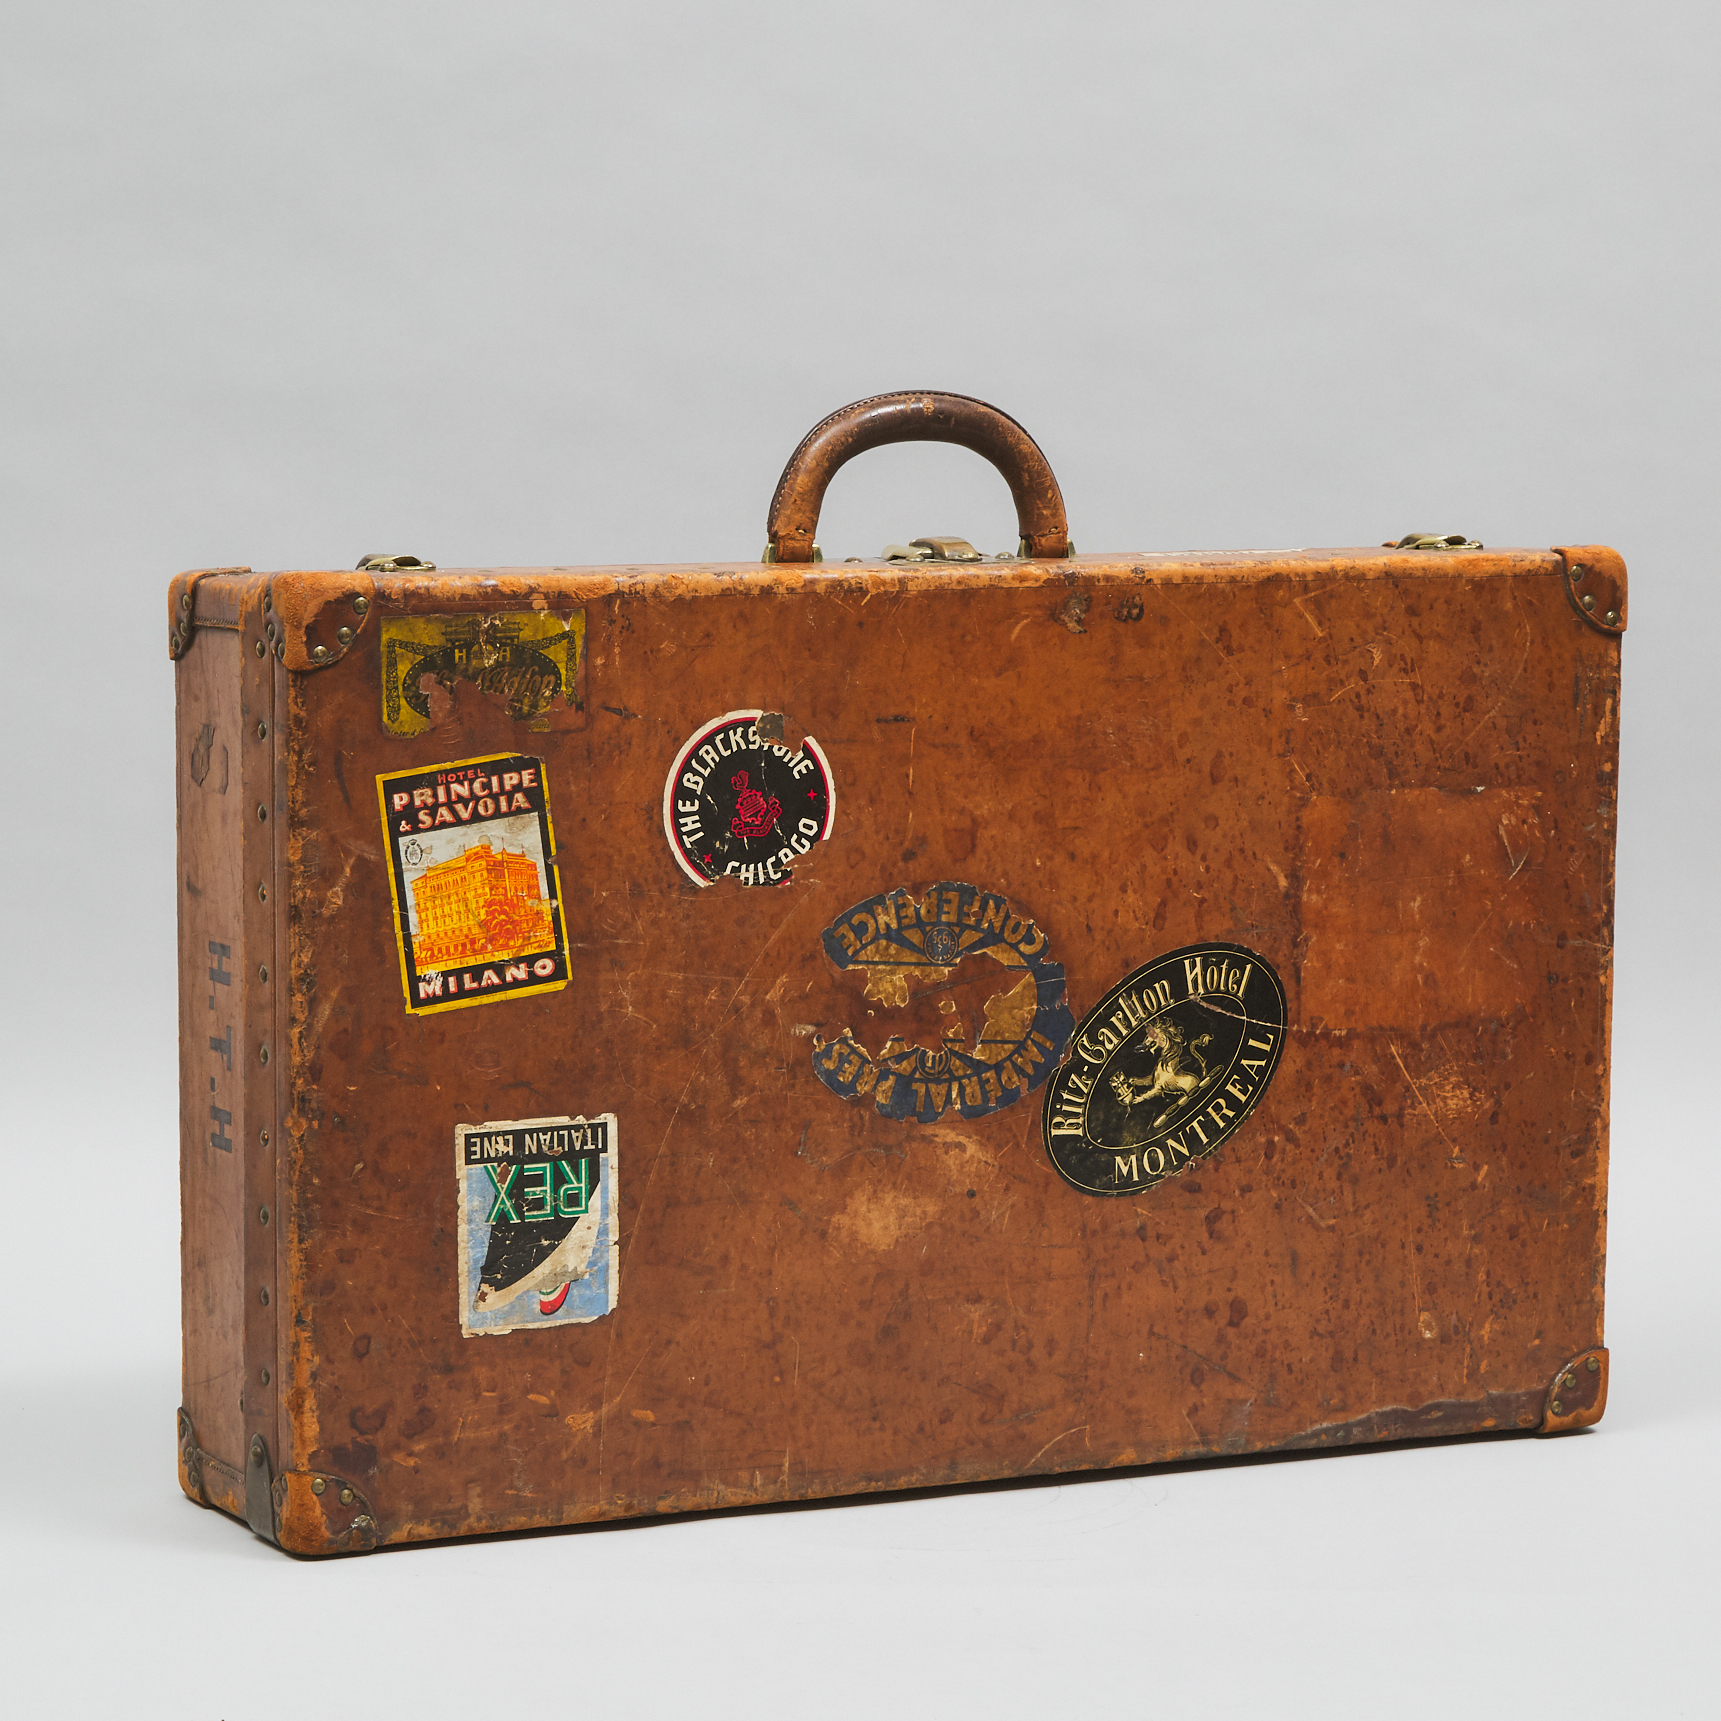 Louis Vuitton Hard Sided Tan Leather Suitcase, c.1930